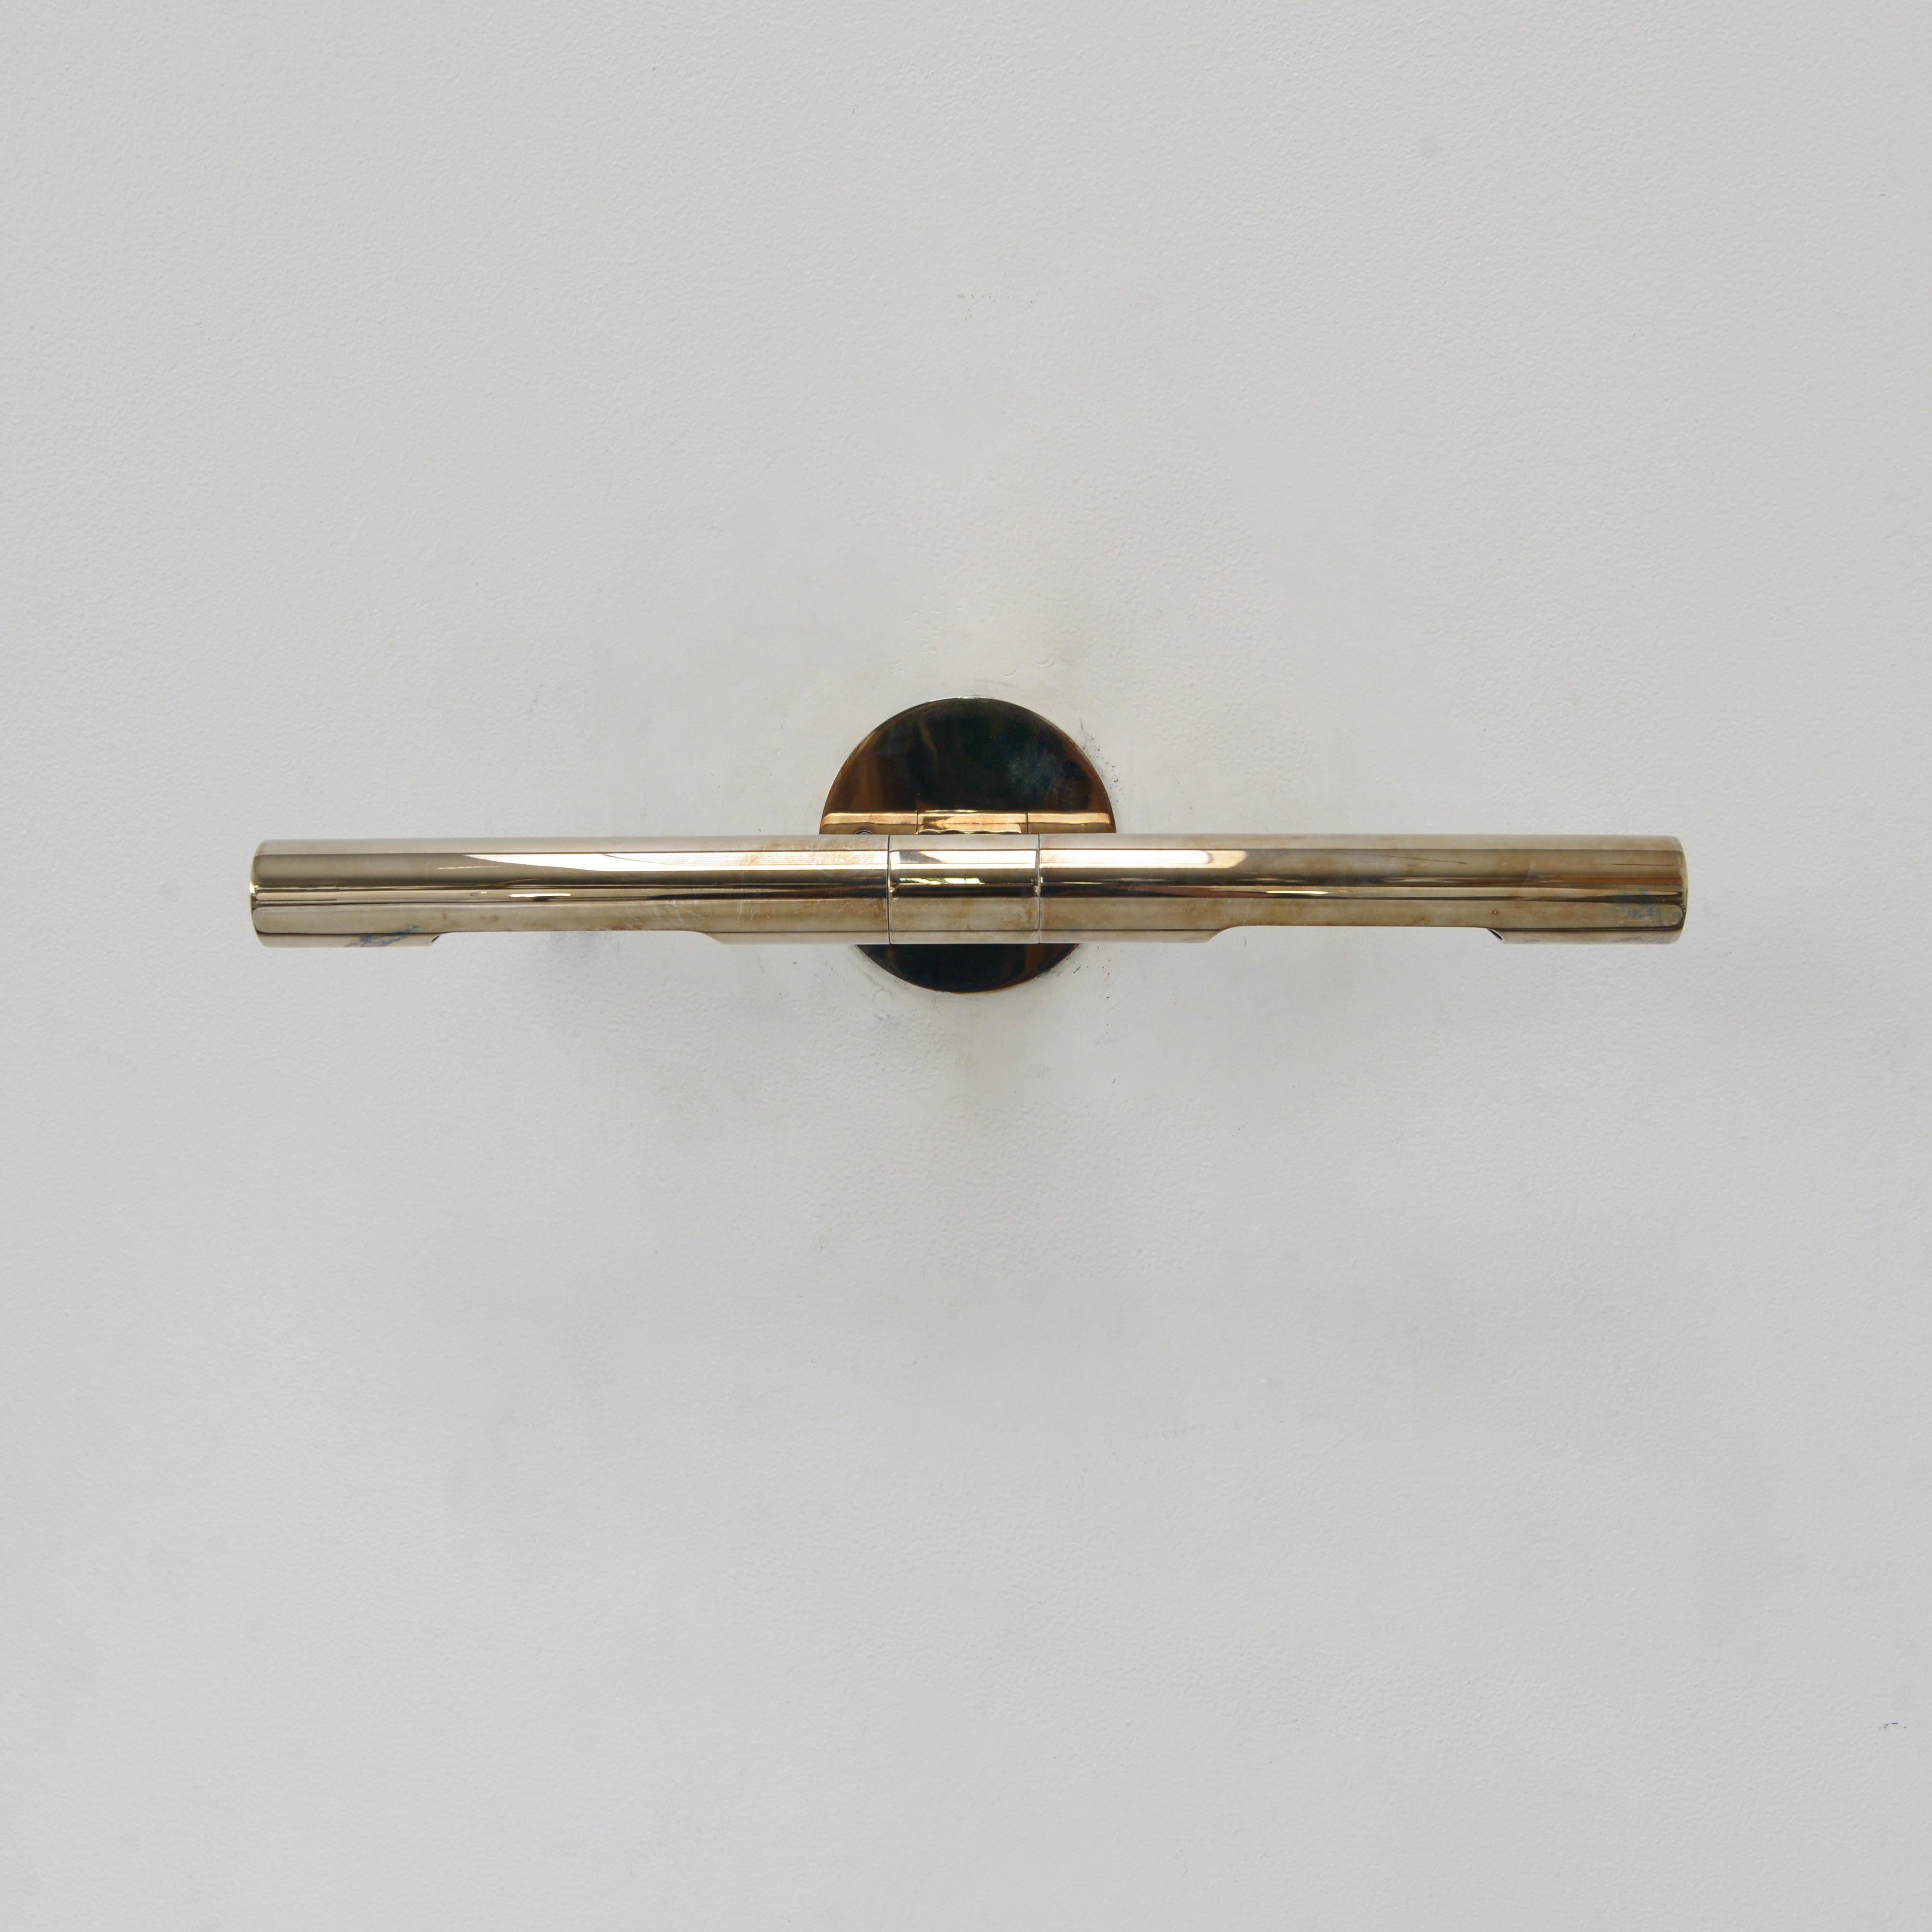 Superbly crafted linear wall sconce designed by Lumfardo Luminaires in an aged silver finish. Sconce is designed to feature artwork and/or objects d’art. Each shade is independent and can be directed individually. Fixture comes with mounting